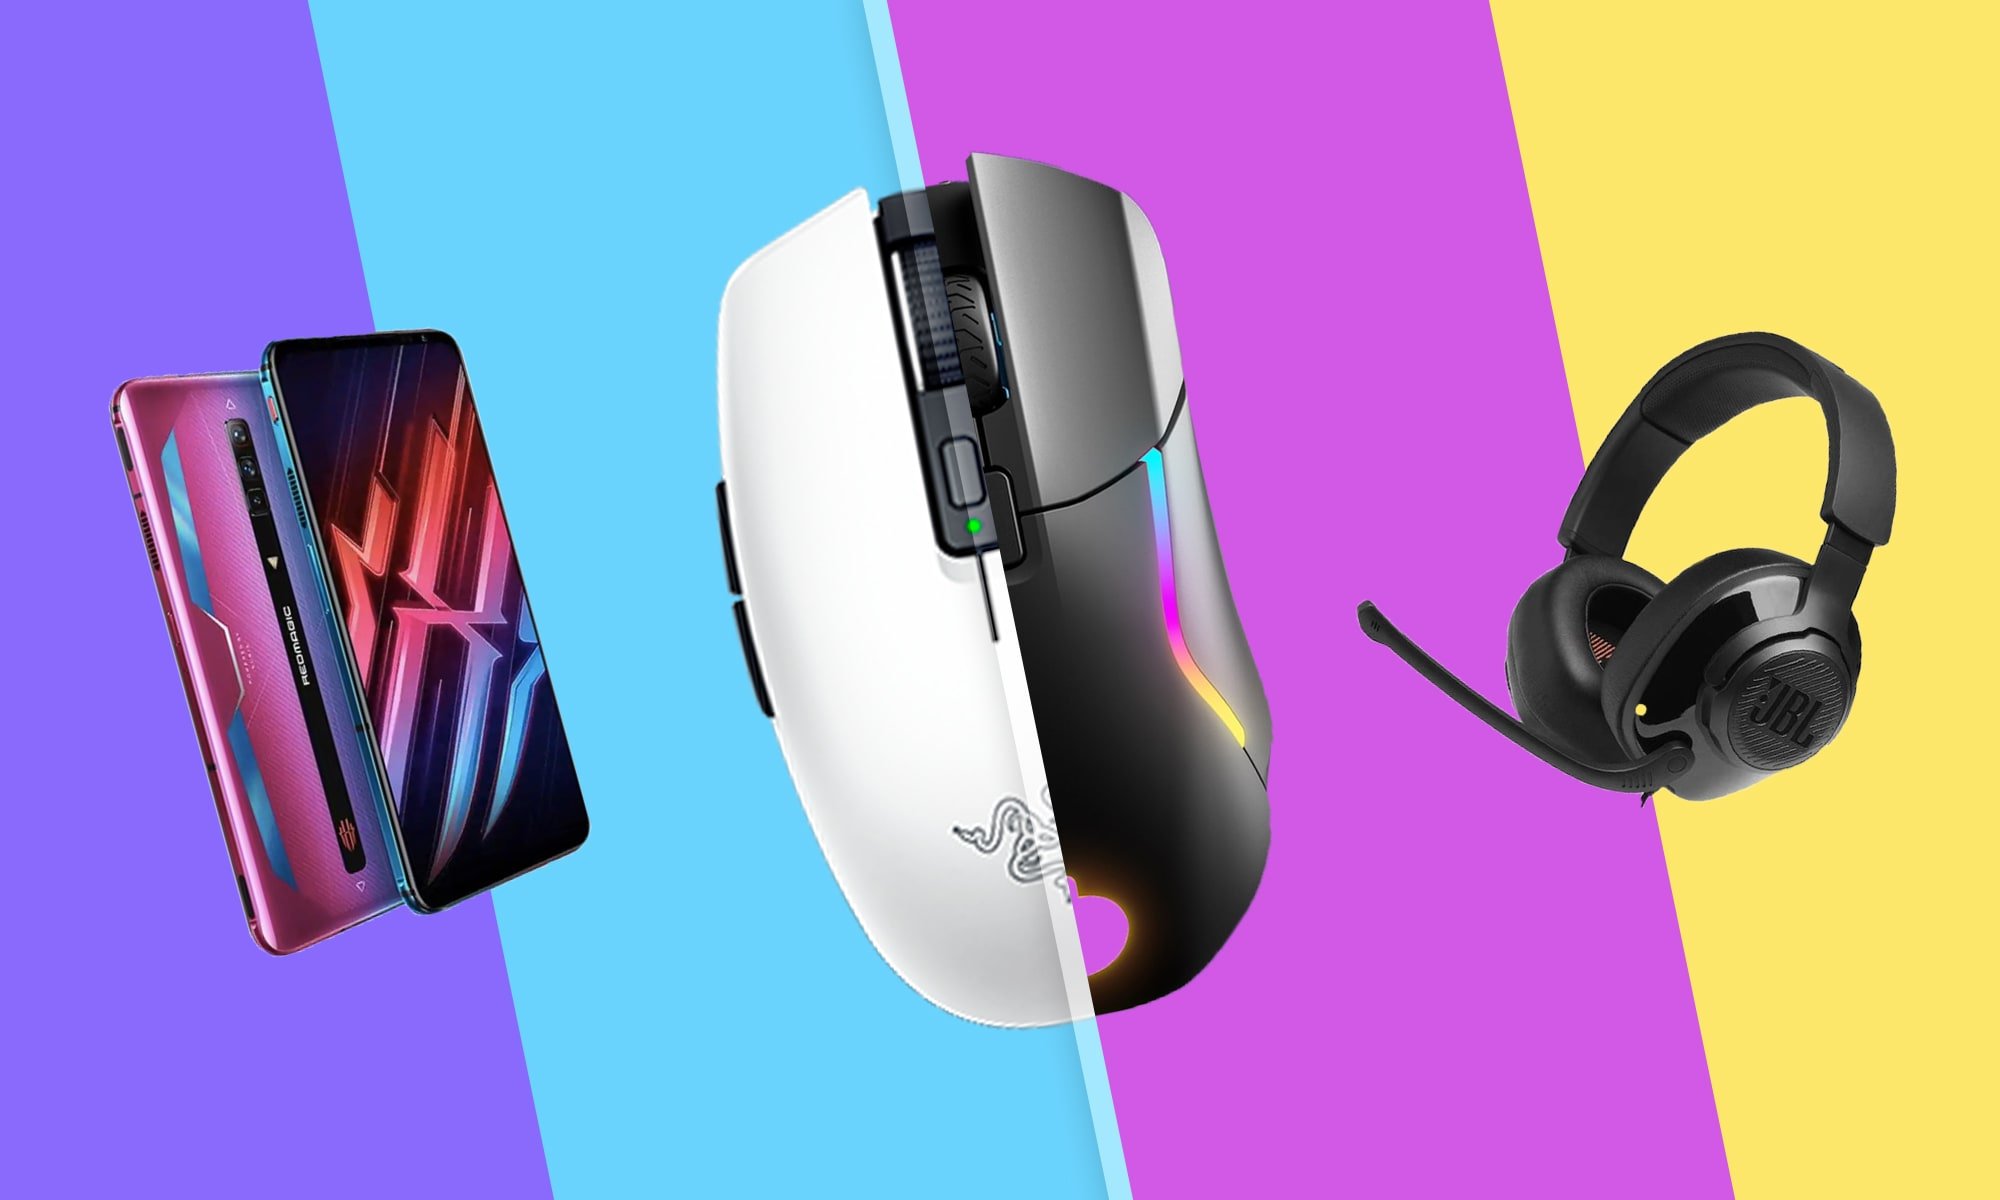 Which gaming gadget should you buy in 2021? Read our gaming guide to find the best options